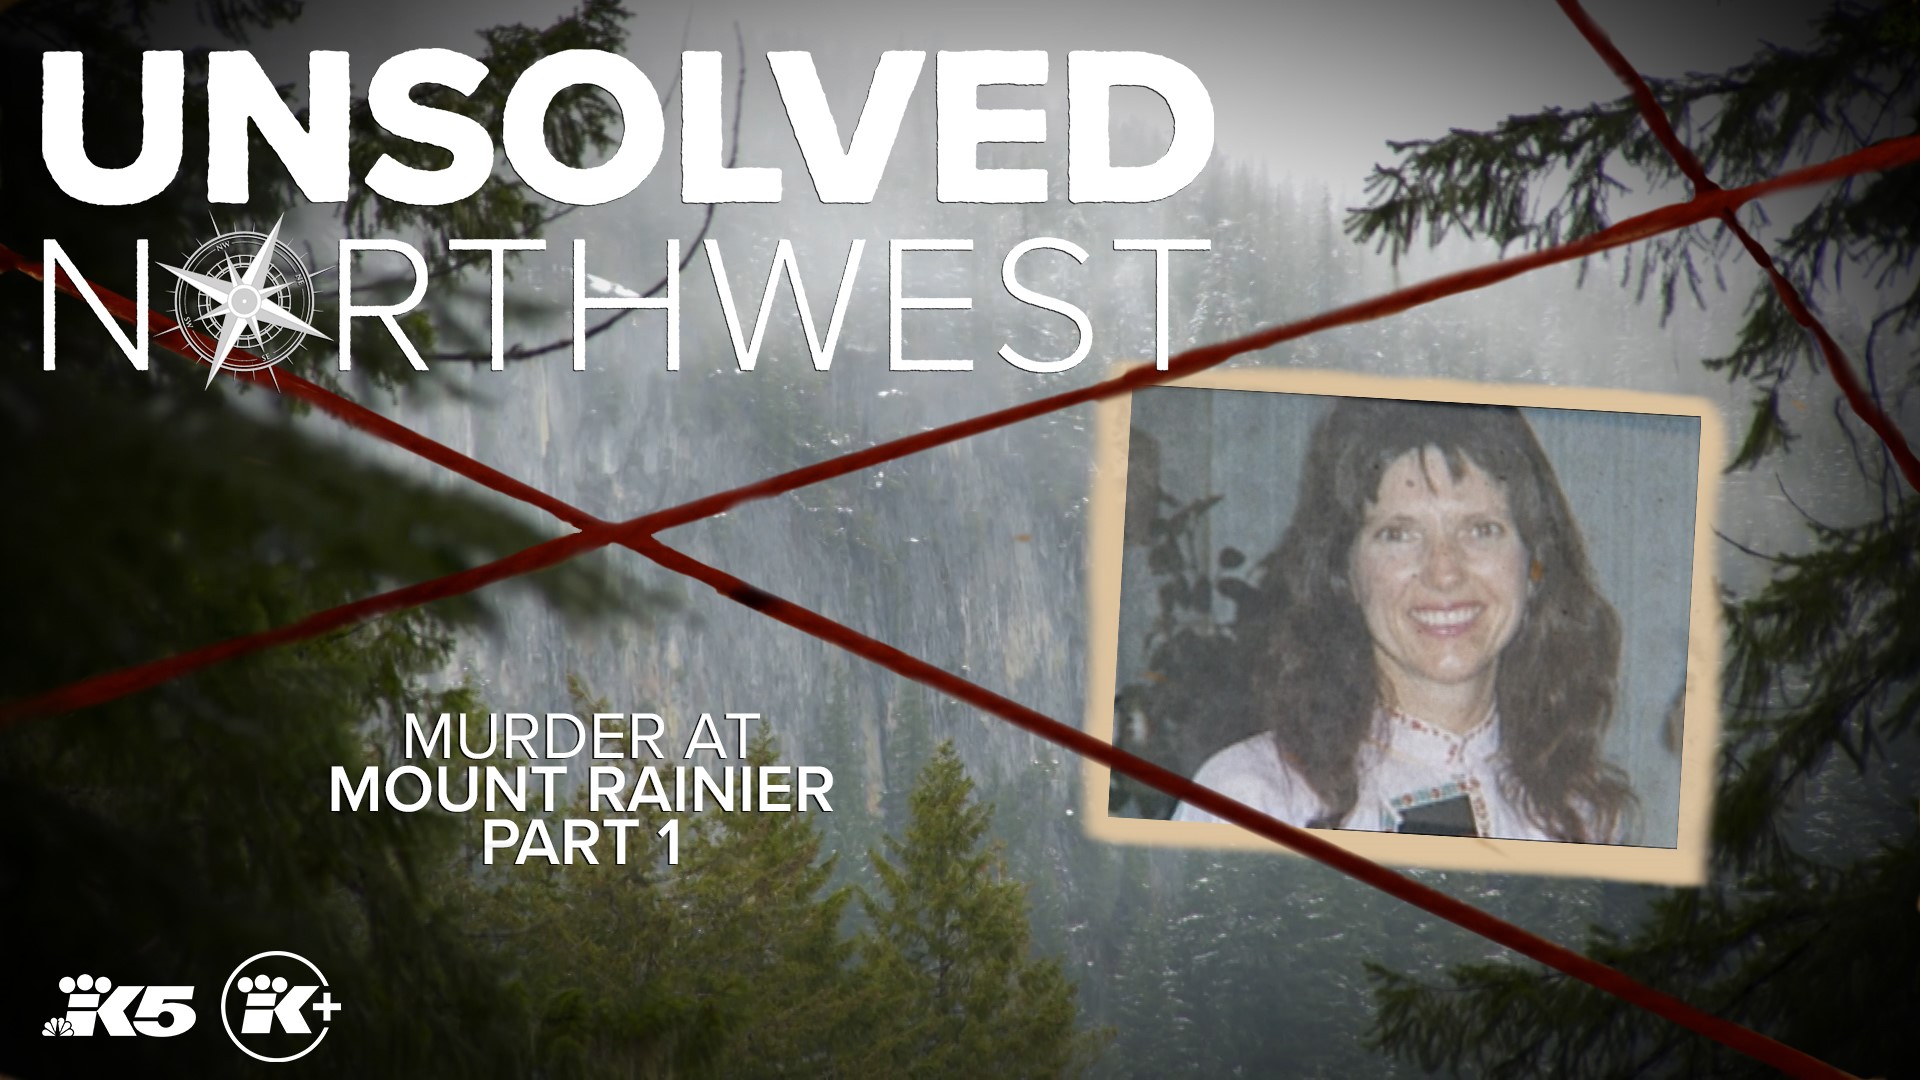 Sheila Kearns, 43, loved her job at Mt. Rainier National Park. When she didn't show up for a shift one fall morning in 1996, her coworkers knew something was wrong.